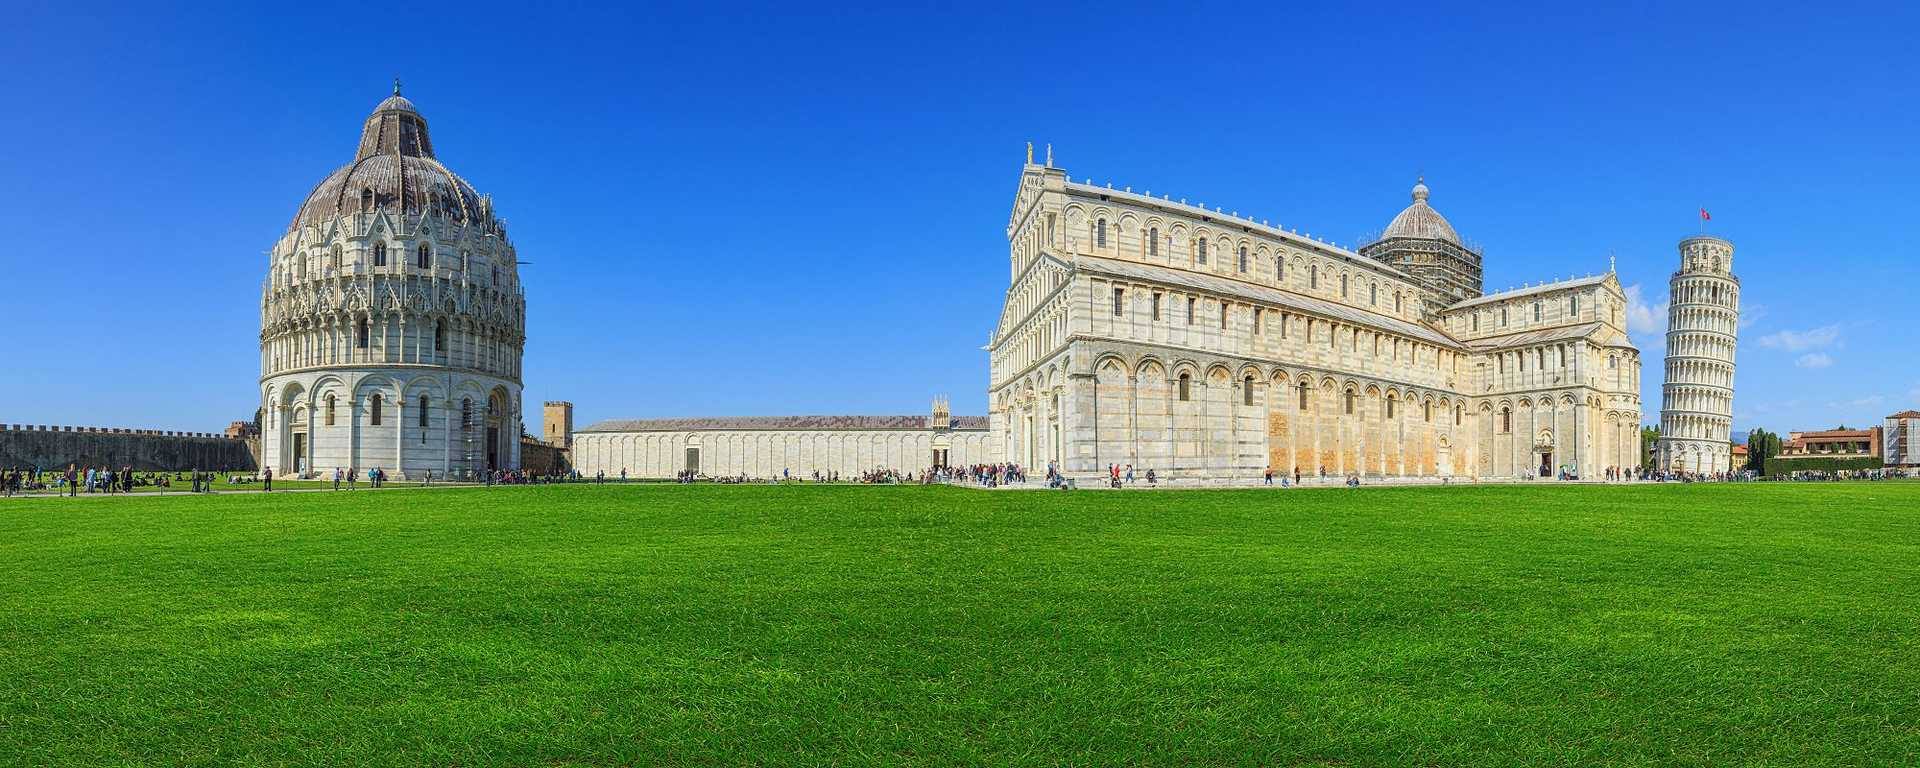 Piazza dei Miracoli complex with the Leaning Tower of Pisa in Italy